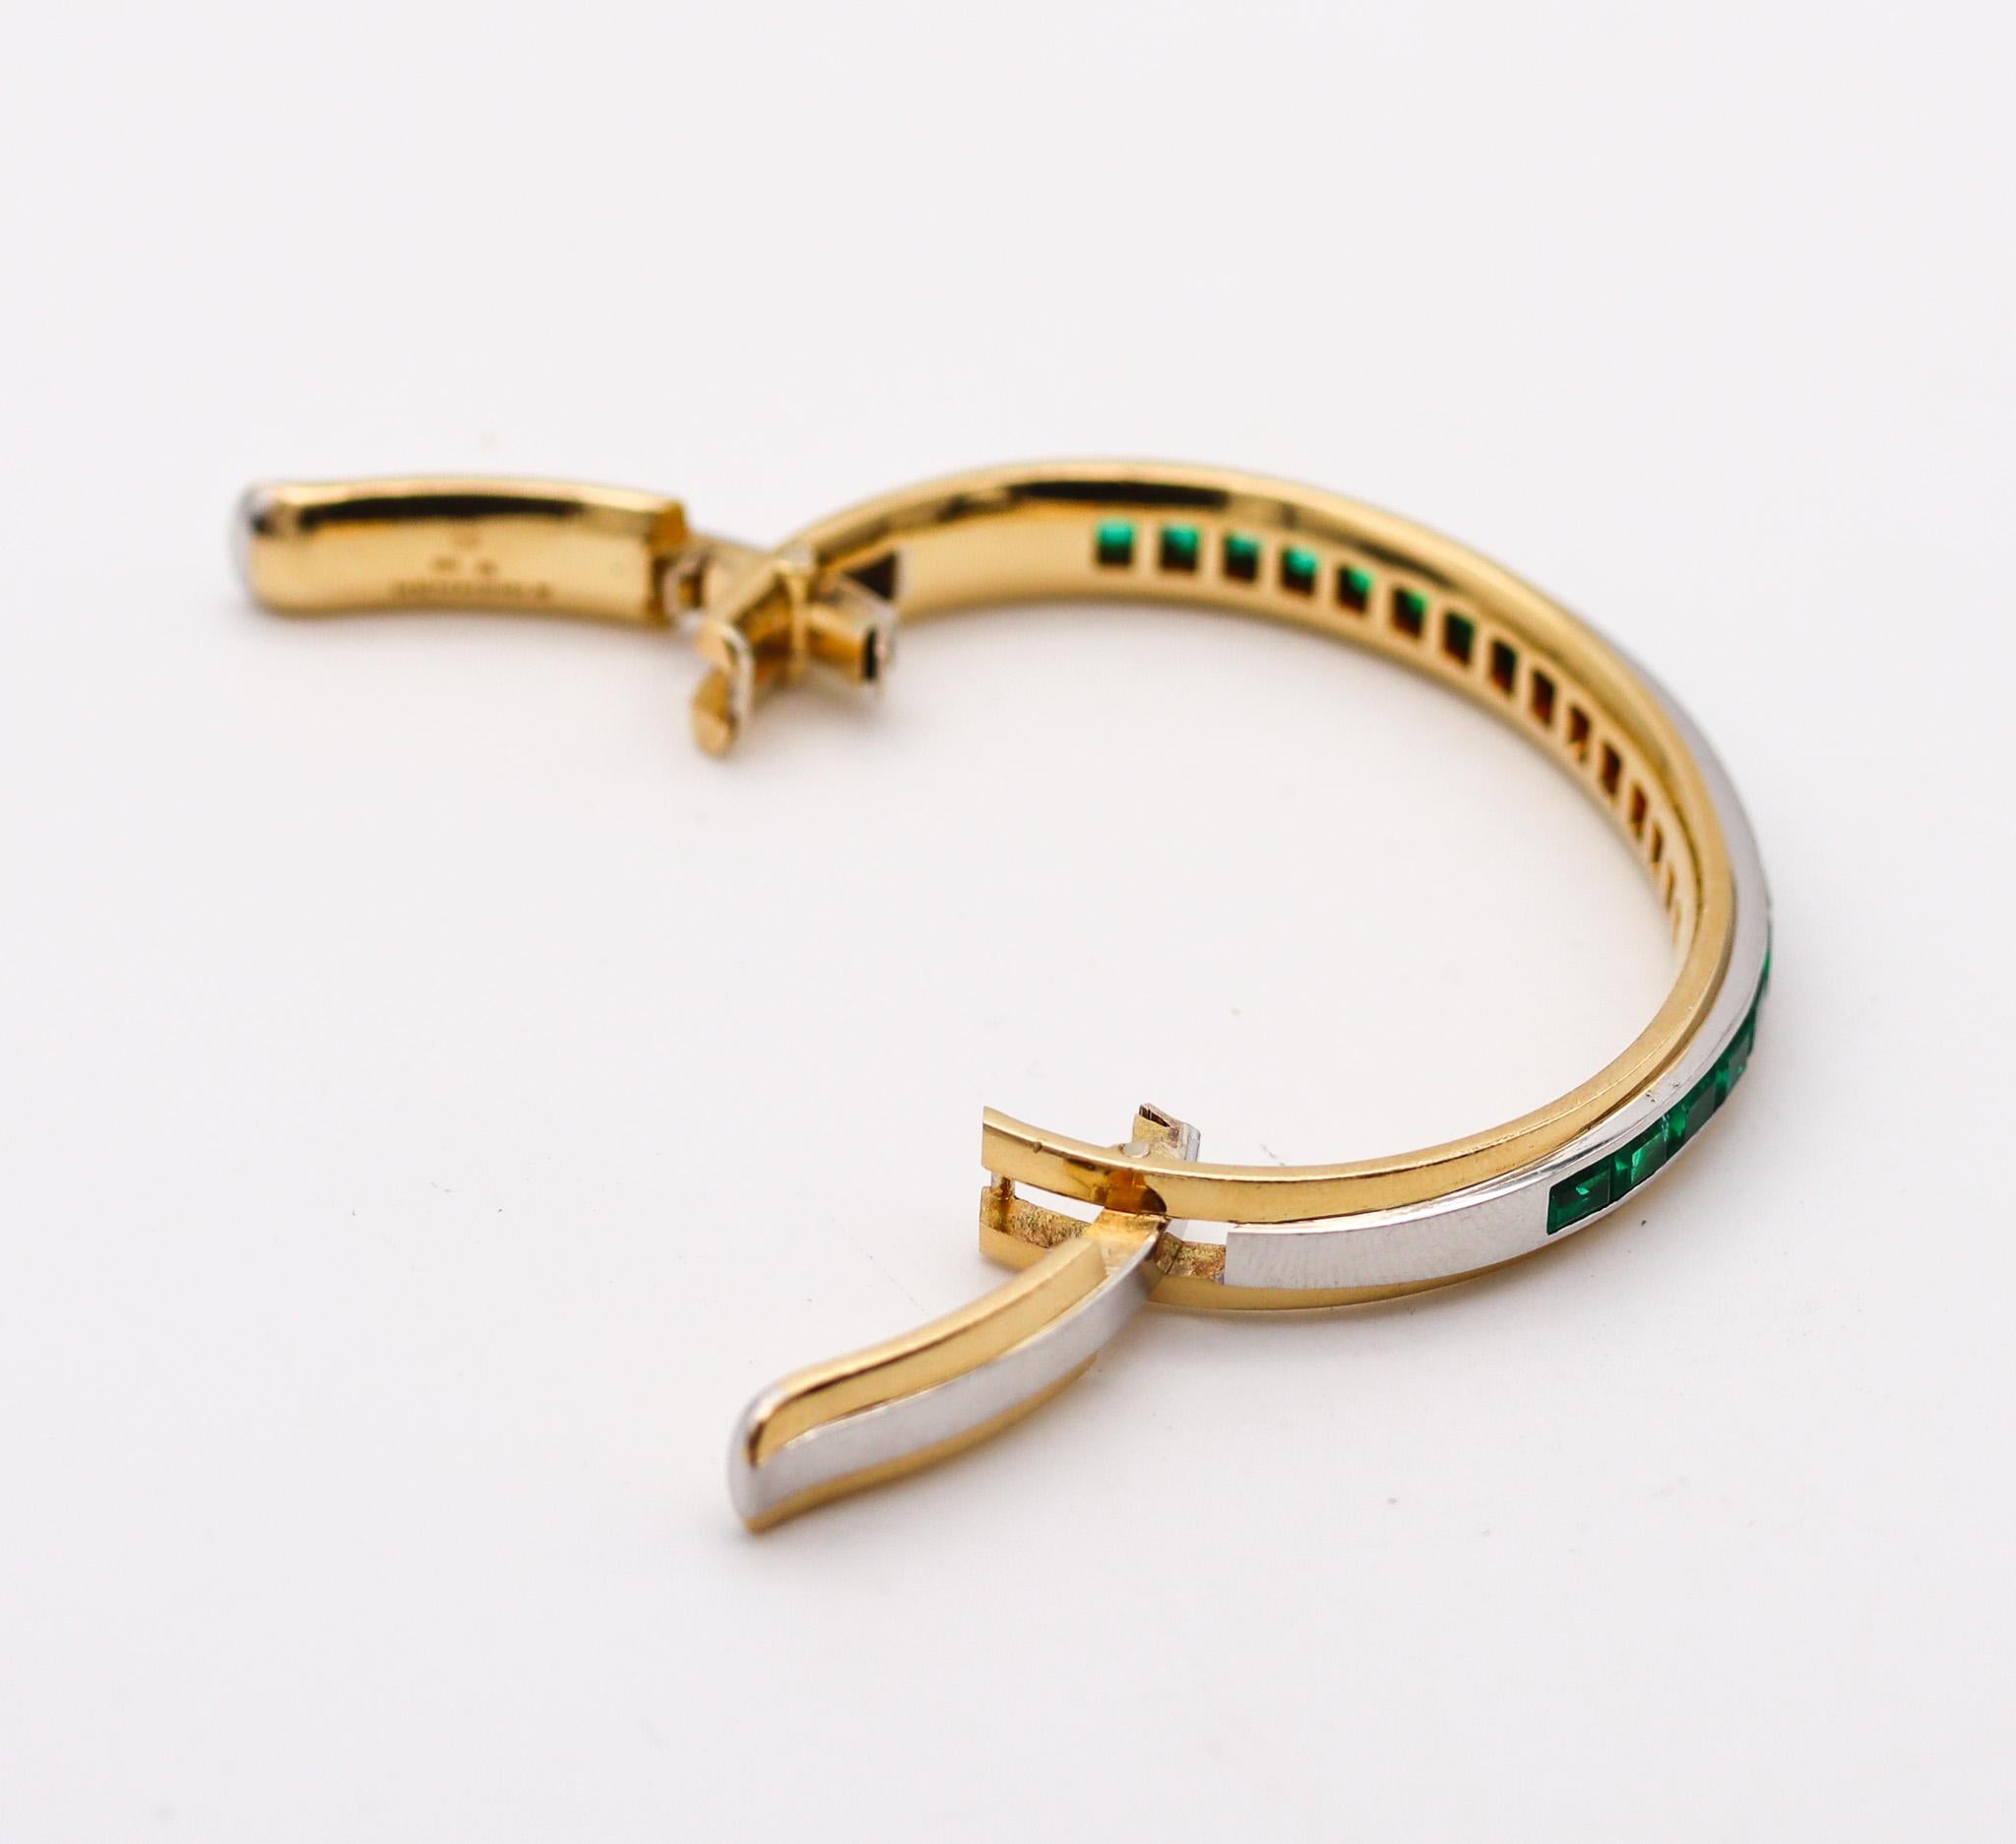 Hemmerle Bangle Bracelet In 18Kt Gold Platinum With 16.36 Ctw Colombian Emeralds In Excellent Condition For Sale In Miami, FL